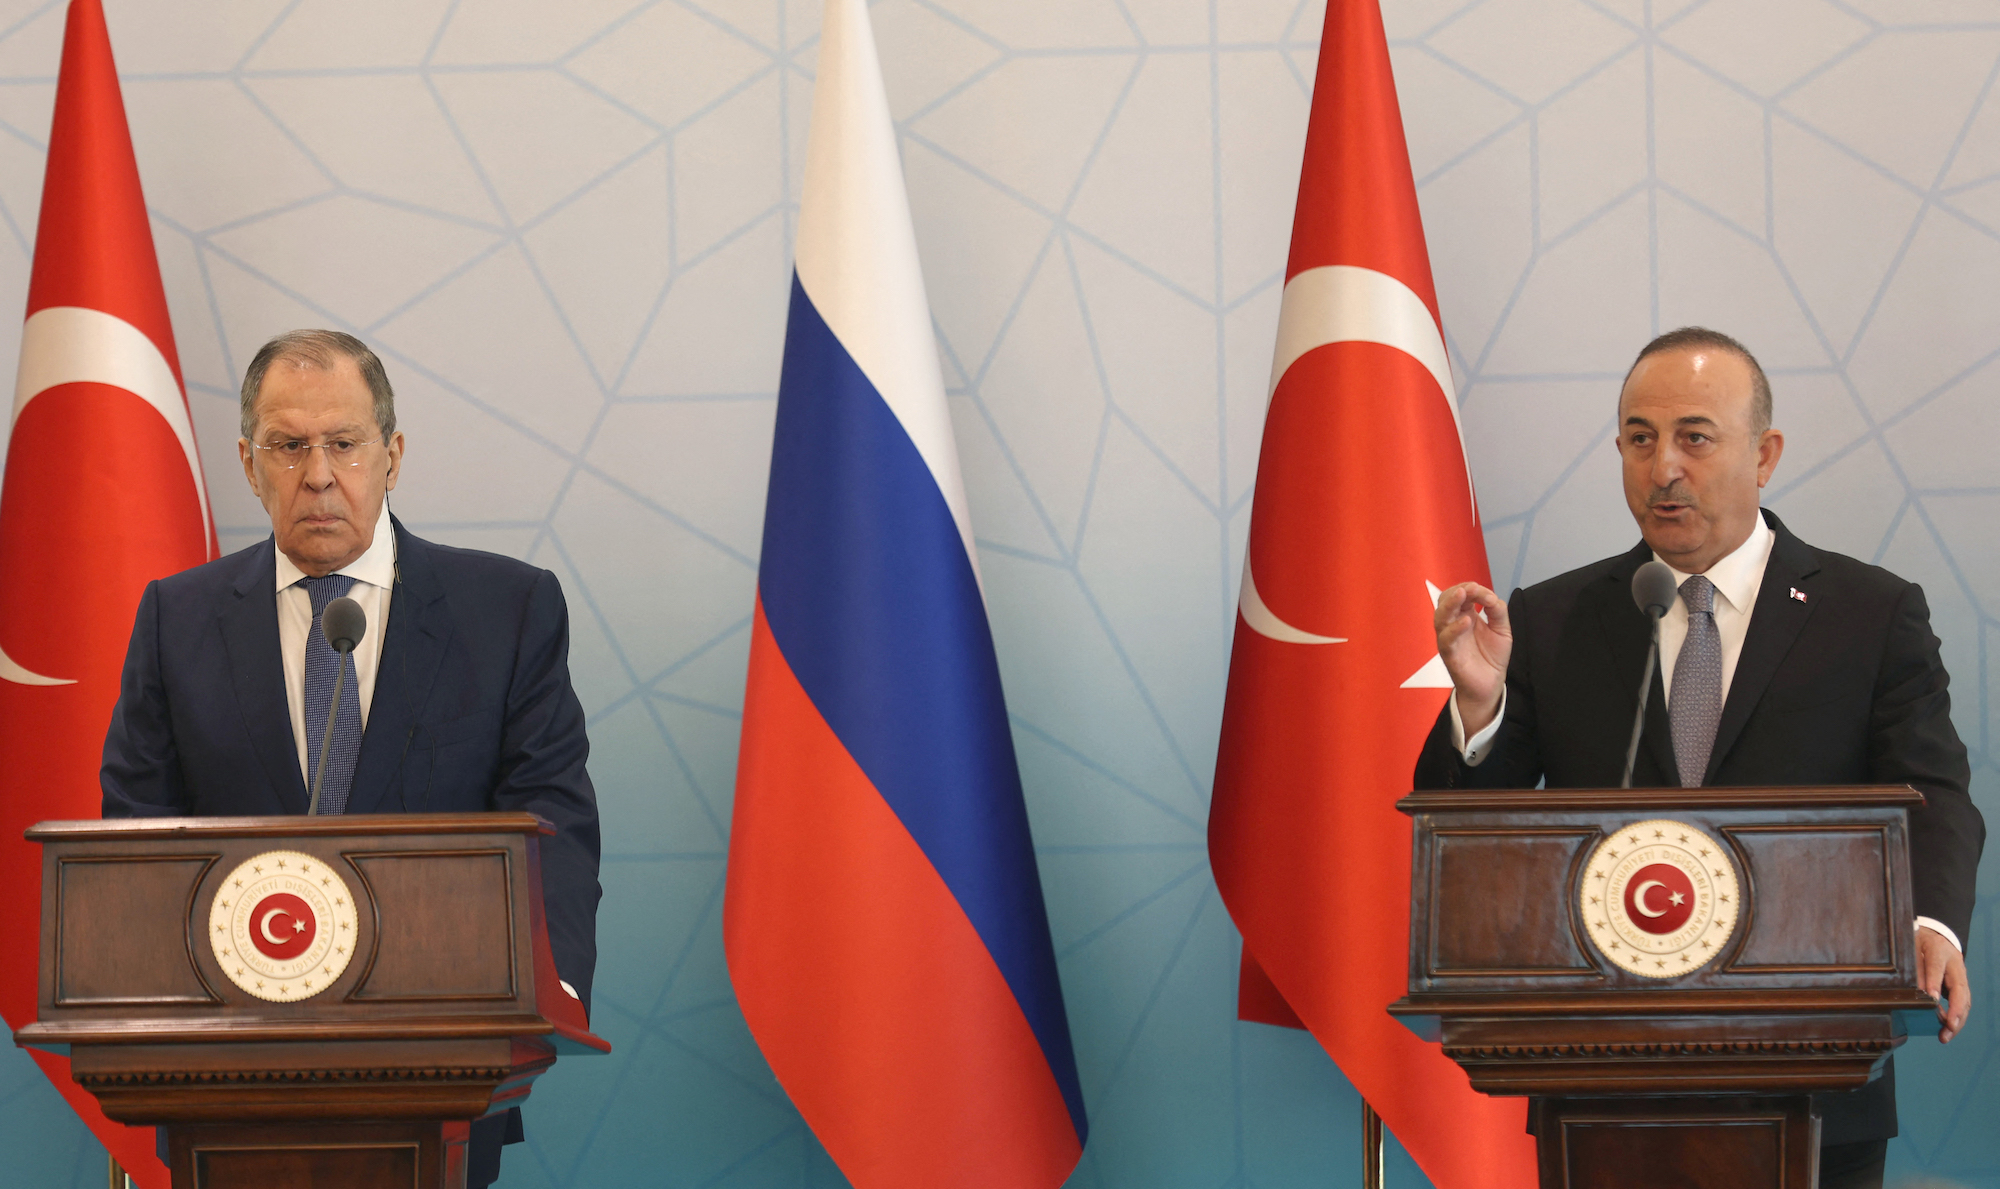 Turkey and Russia